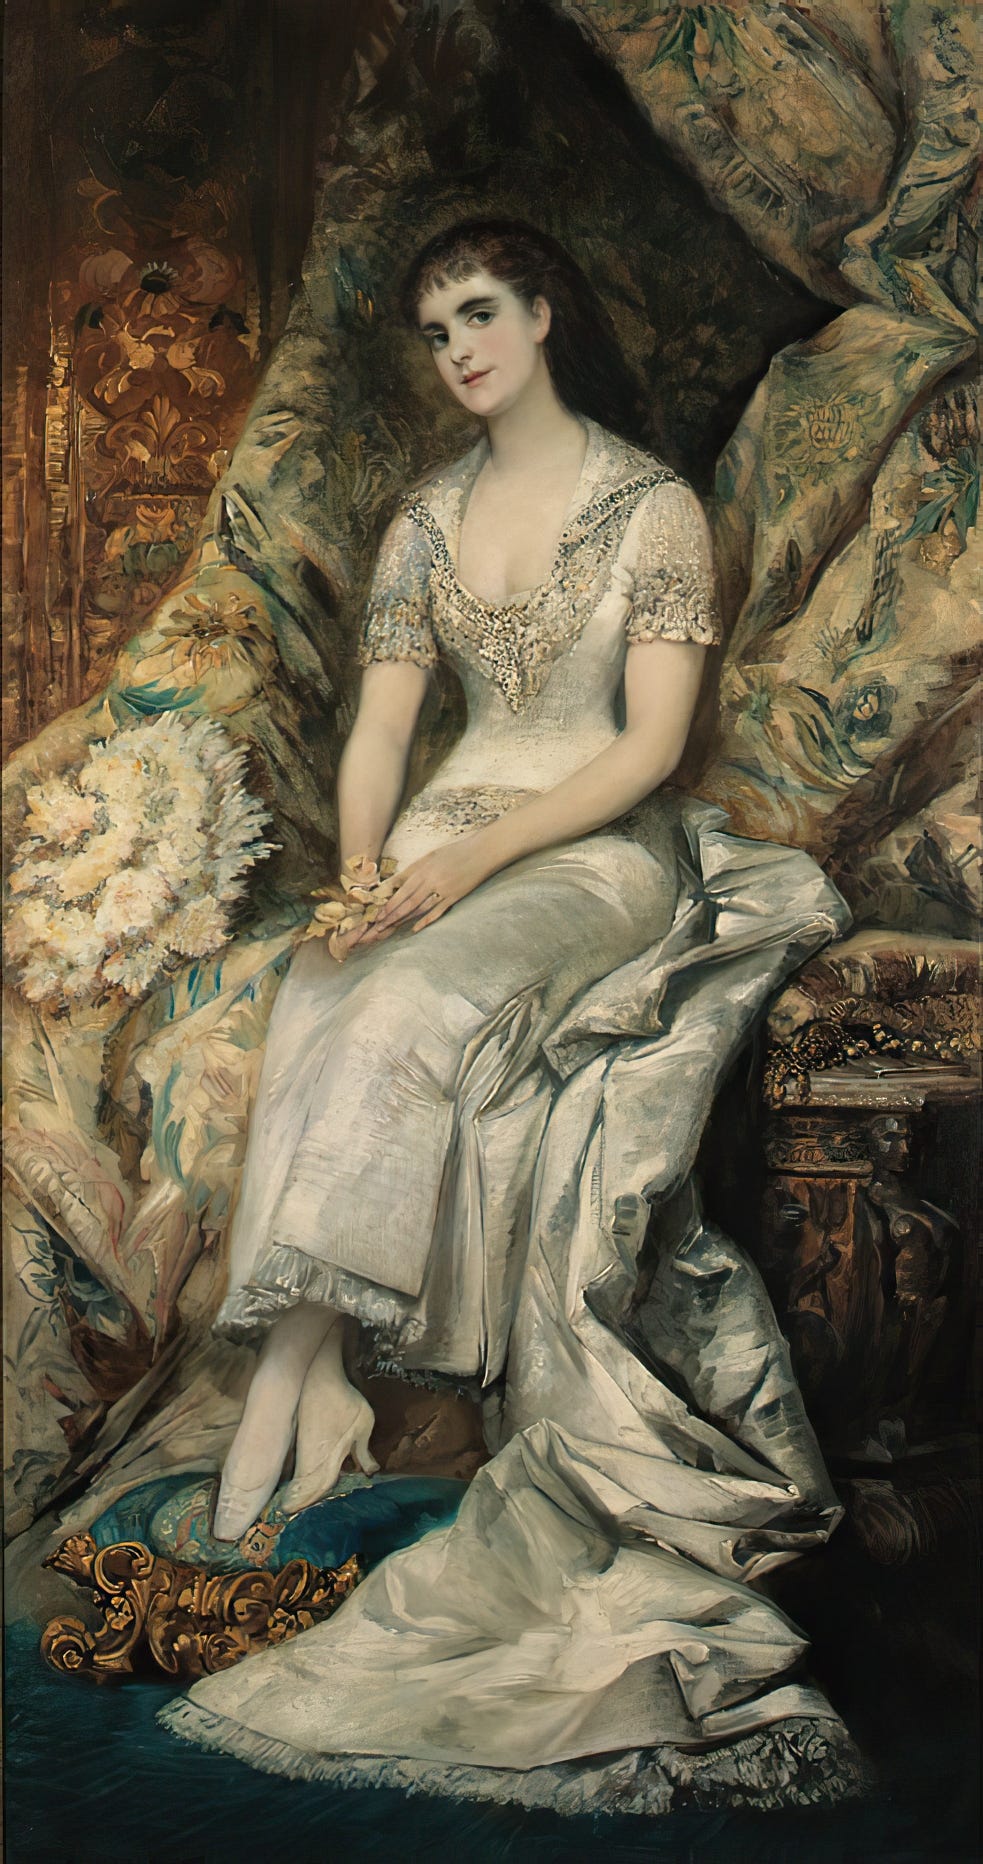 A Portrait Of A Seated Lady, Possibly Countess Bianca Teschenberg by Hans Makart